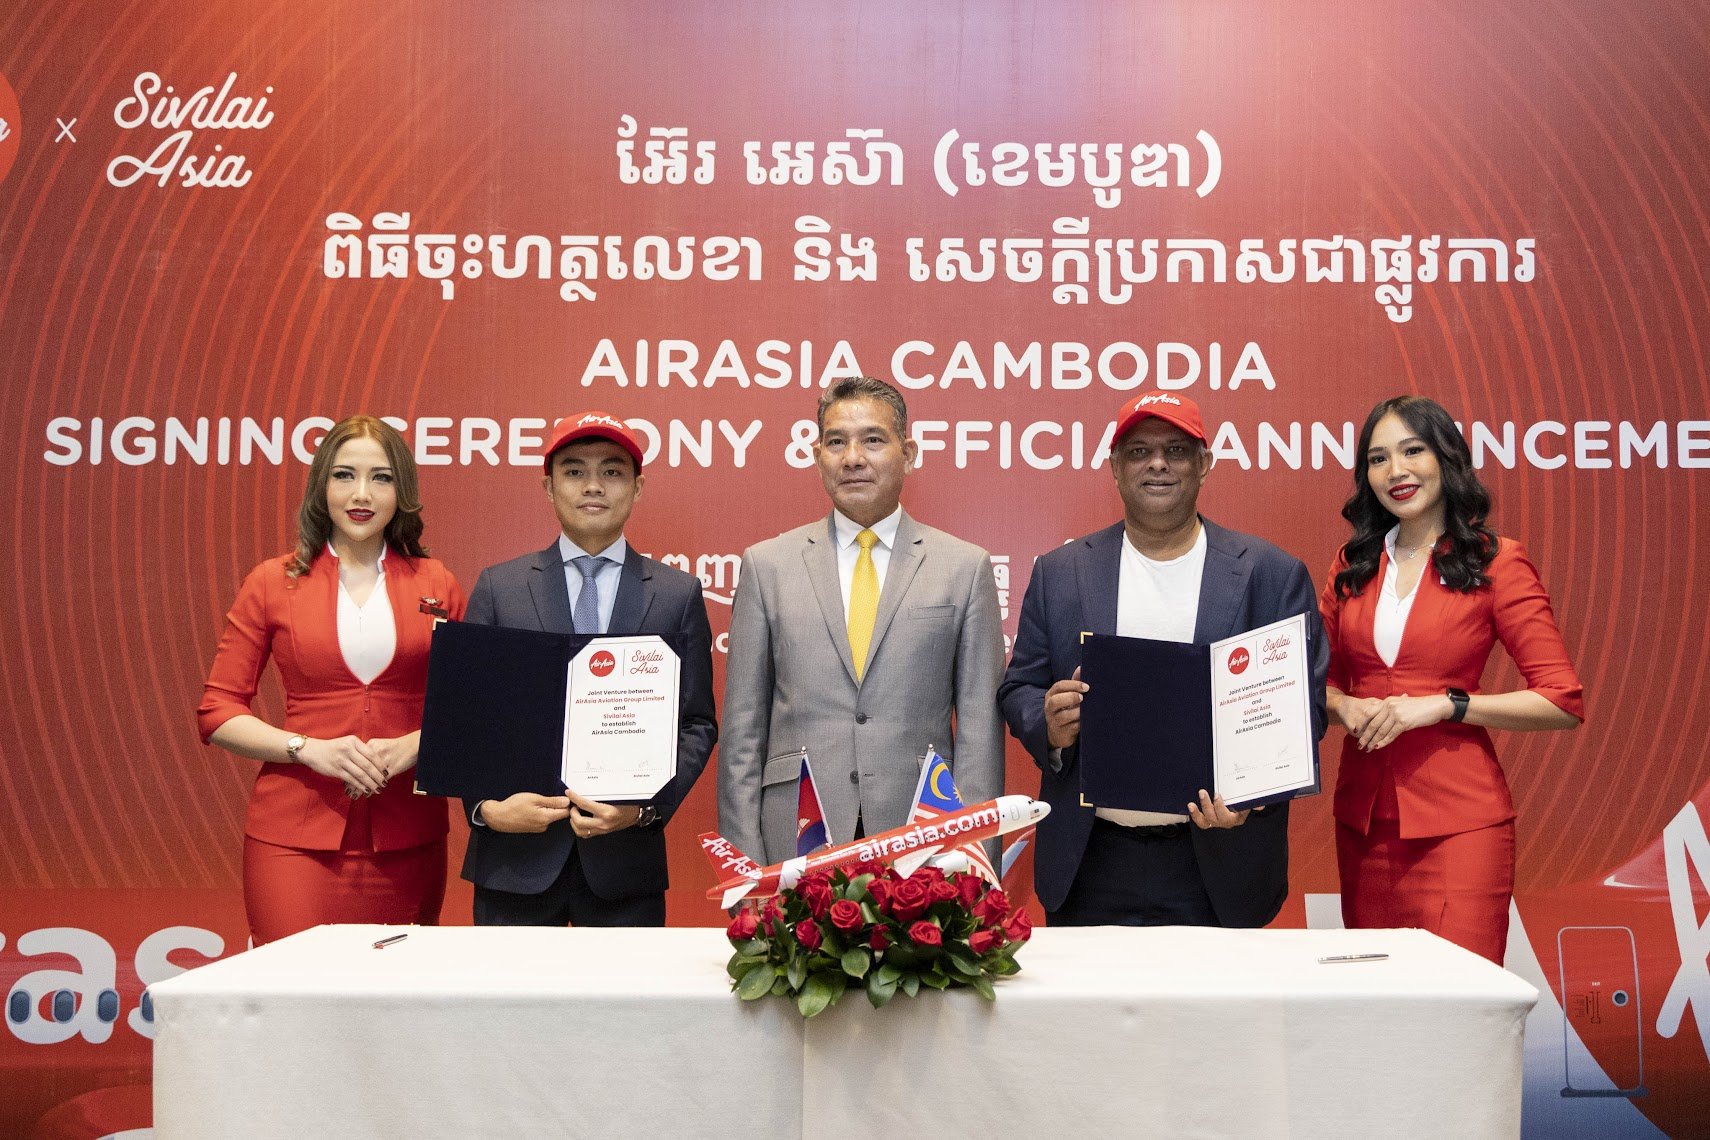   Photo Caption:  (Second from left)   Vissoth Nam, Director of Sivilai Asia and Tony Fernandes, CEO of Capital A at the AirAsia Cambodia Joint Venture signing ceremony, witnessed and presided over by His Excellency Dr. Mao Havannal, Minister in Char